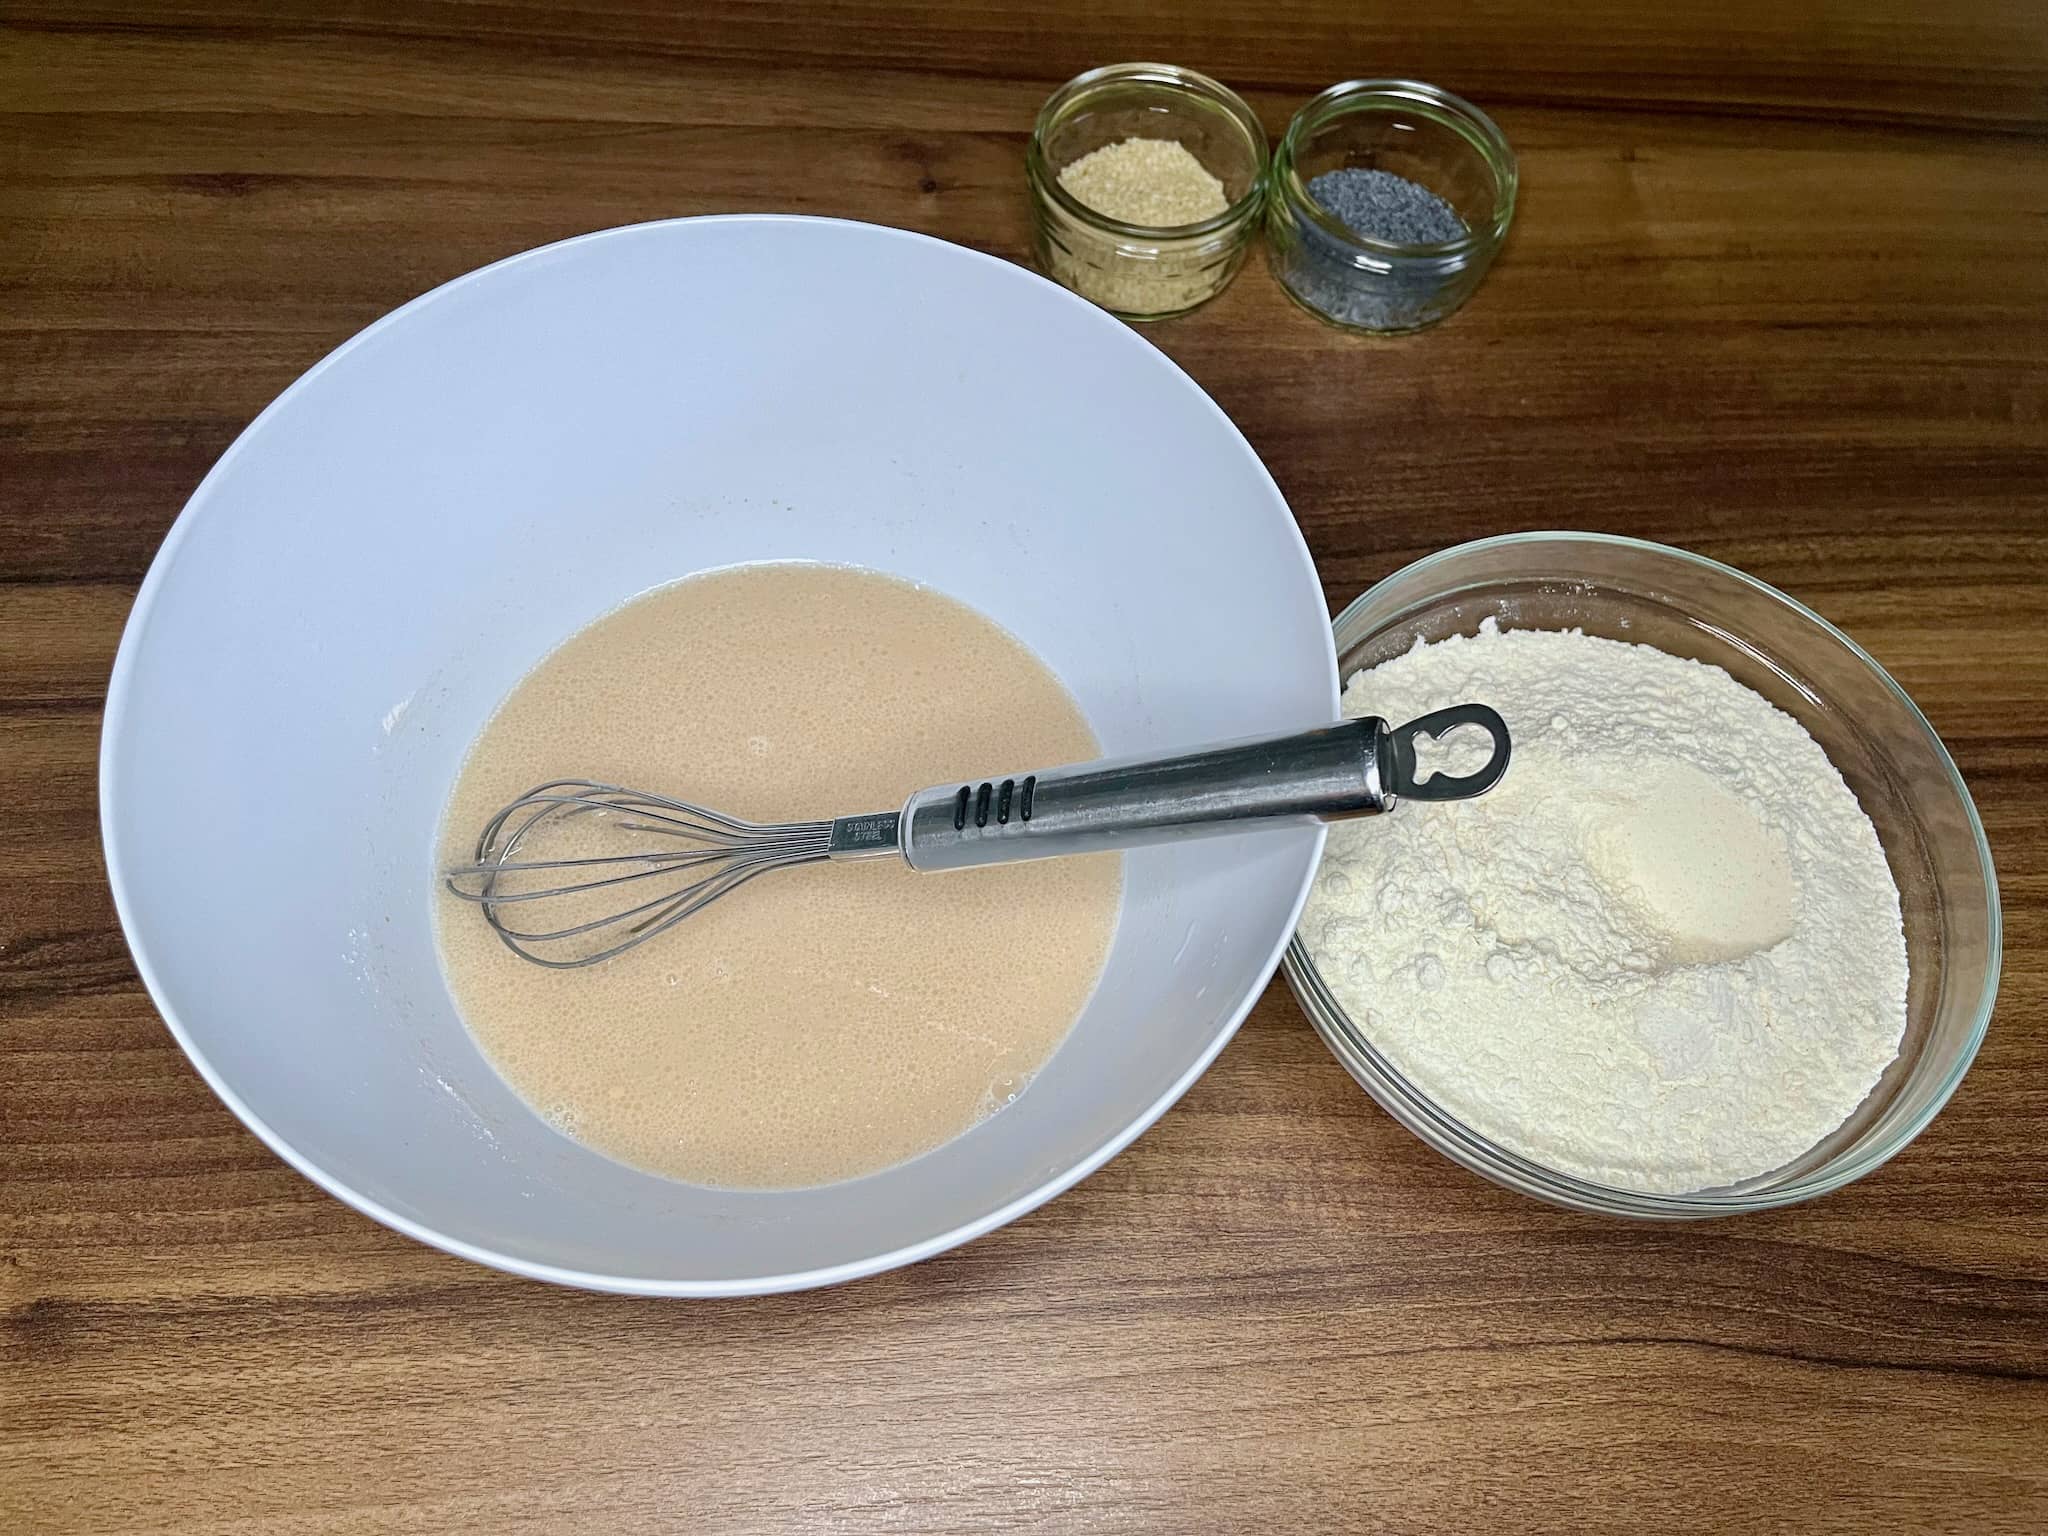 Yeast mixed in a bowl full of water before adding other ingredients